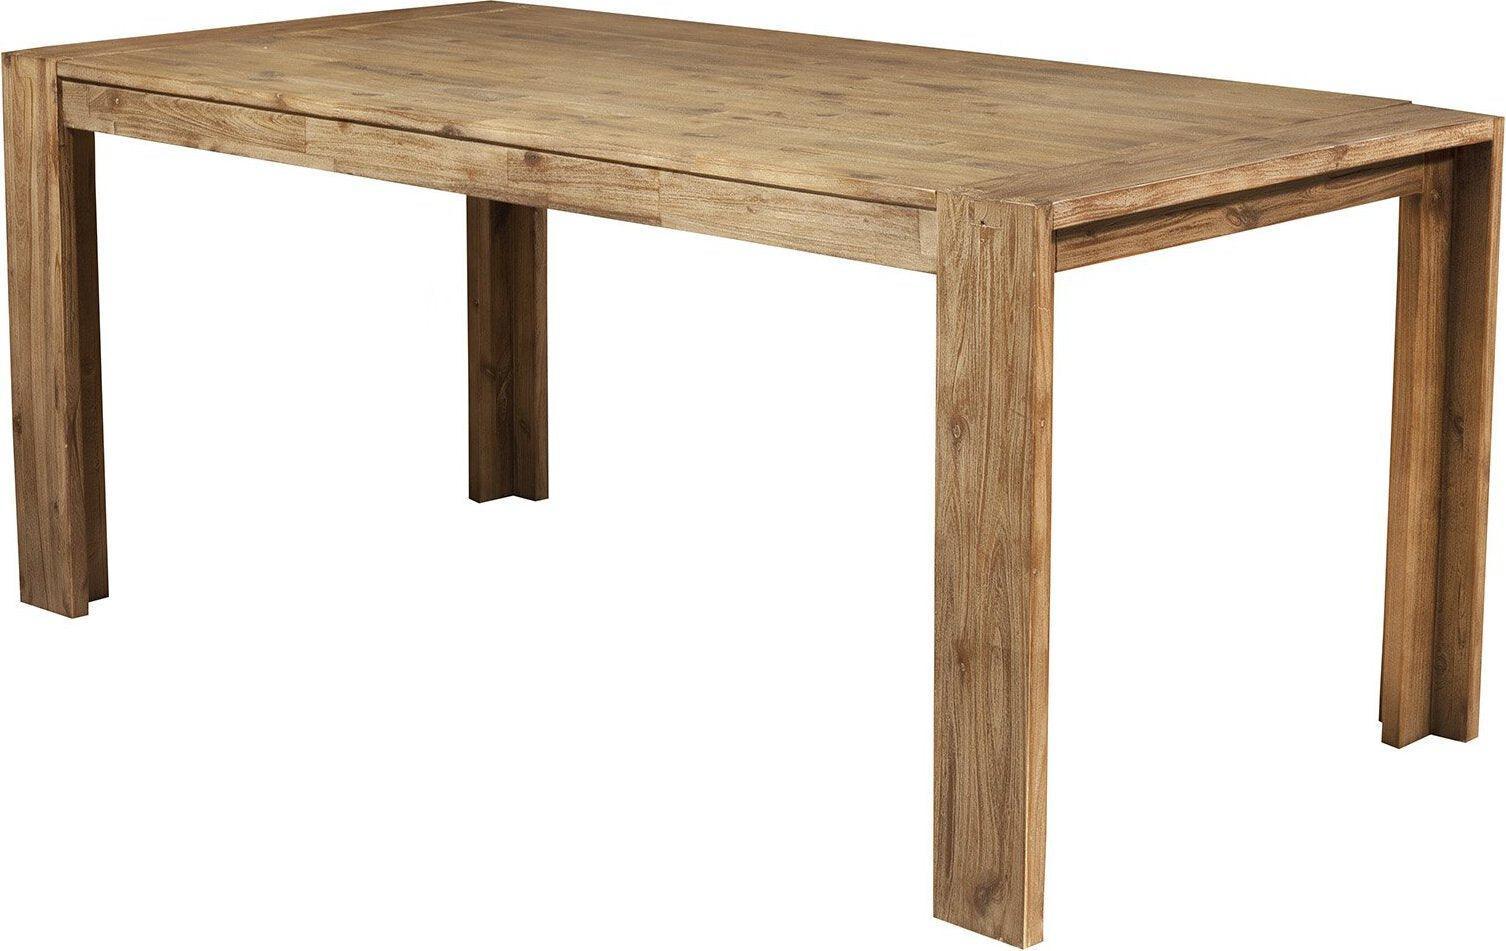 Alpine Furniture Dining Tables - Seashore Fixed Top Dining Table Antique Natural